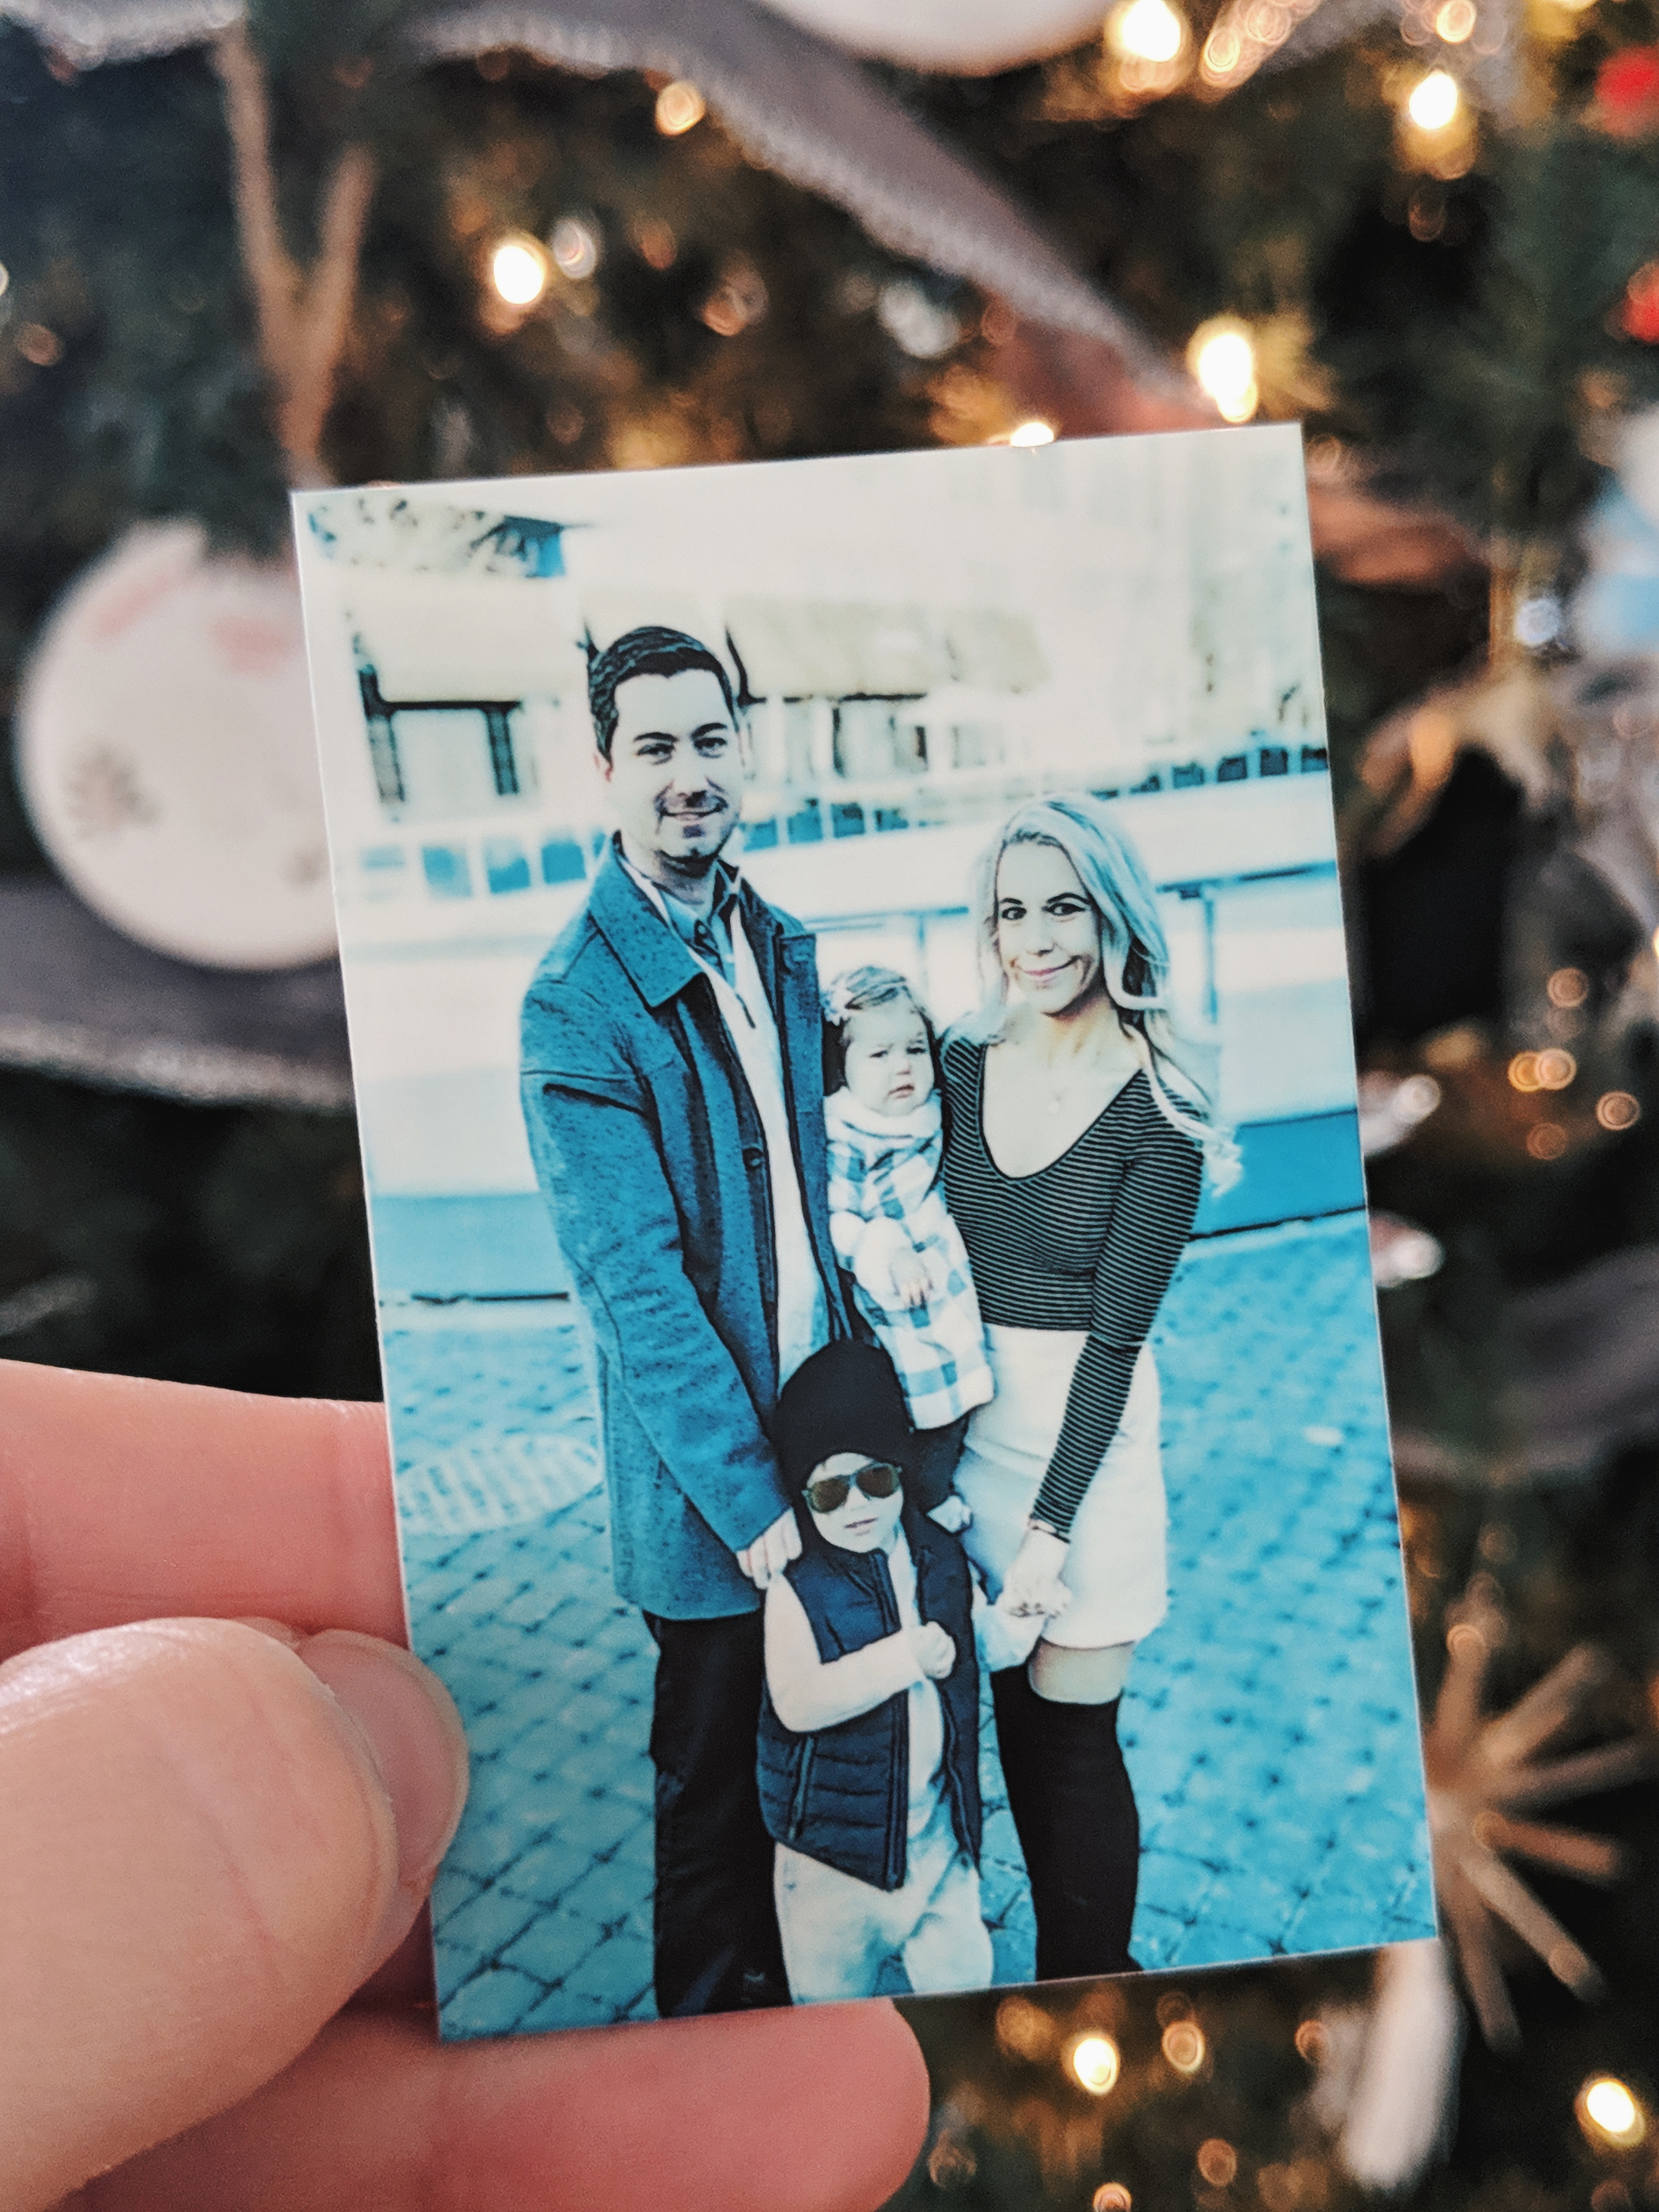 Thanksgiving as a Family of Four: Here's how we spent our second Thanksgiving as a family of 4! Thanksgiving--like all holidays--is crazy with 2 little ones, but we make it work. We were lucky to partner with @Verizon to share some fun holiday hosting tech with my parents when they came for Thanksgiving lunch! #Ad #Thanksgiving #Familyof4 #FamilyHolidays